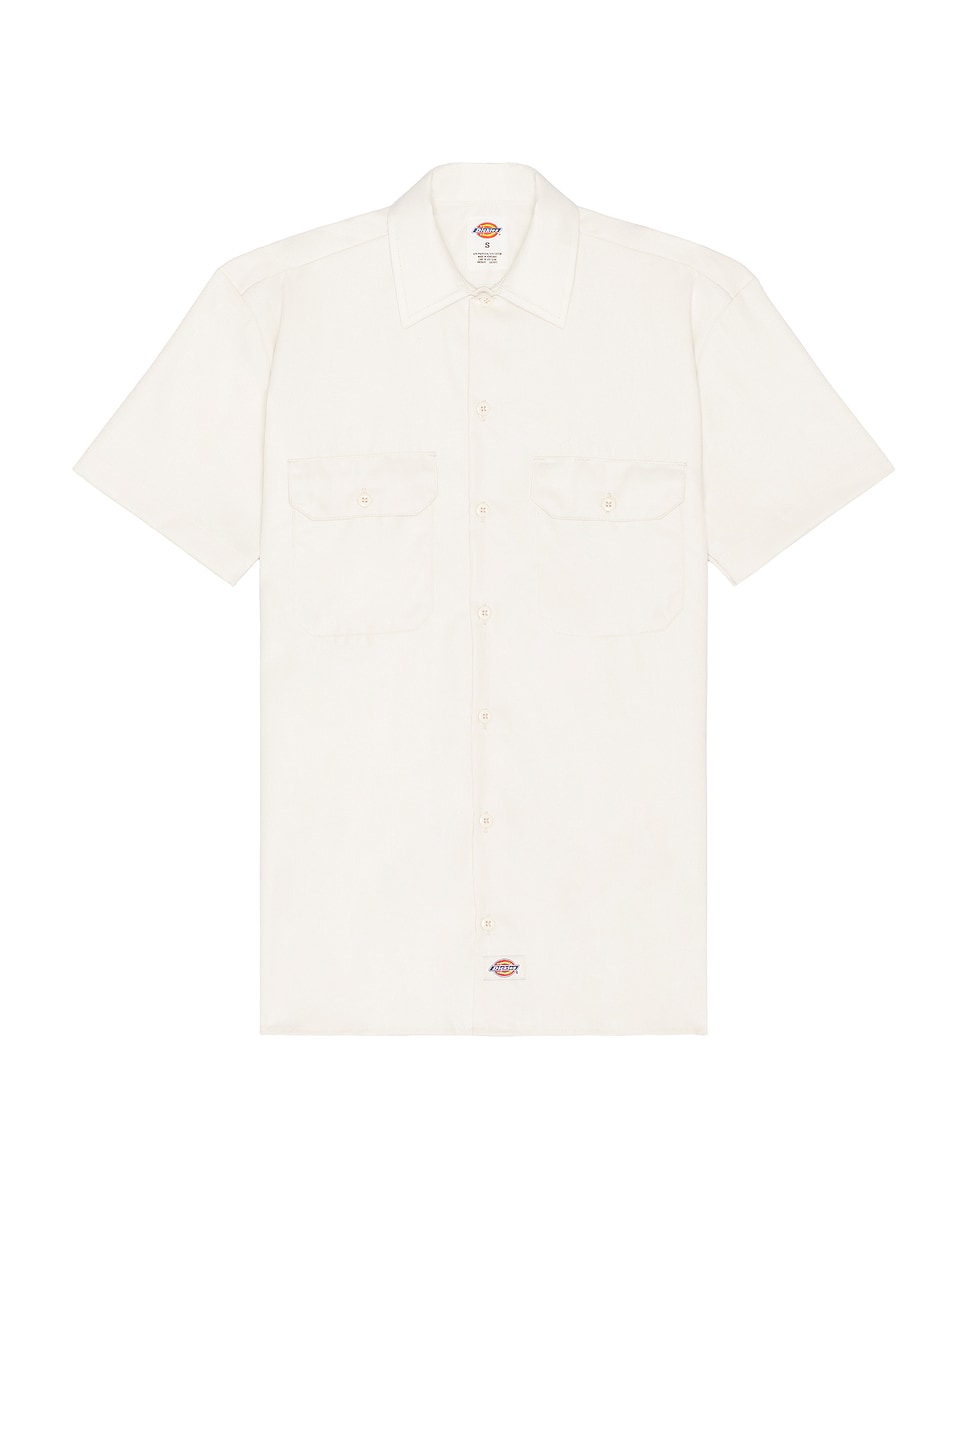 Work Shirt in Ivory